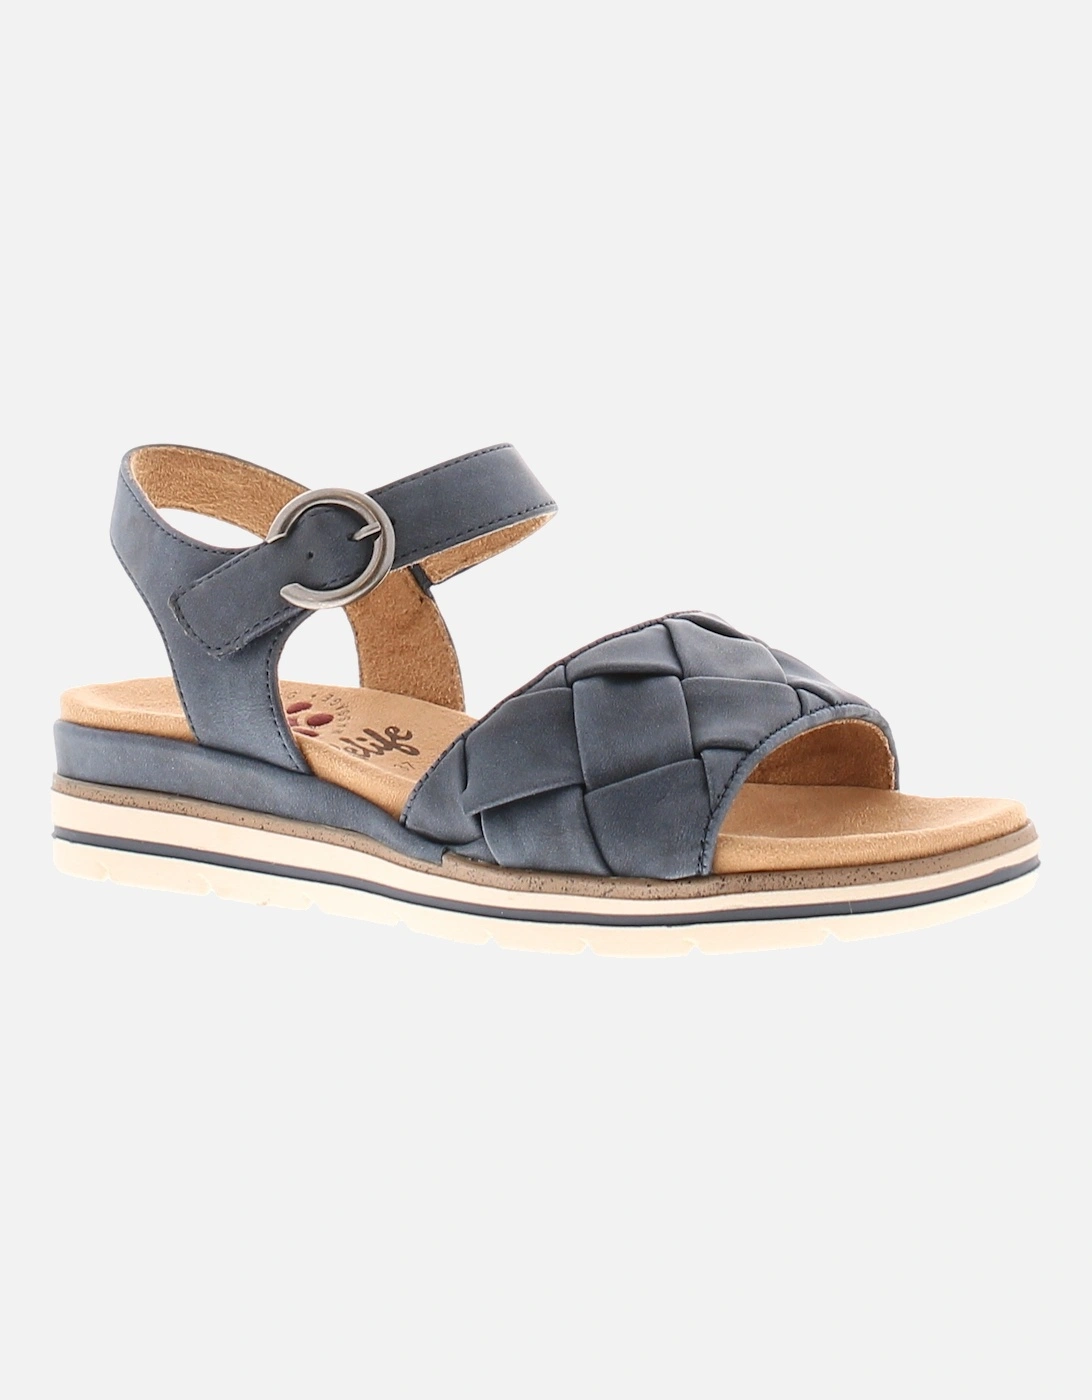 Womens Fashion Sandals Retain Buckle navy UK Size, 6 of 5